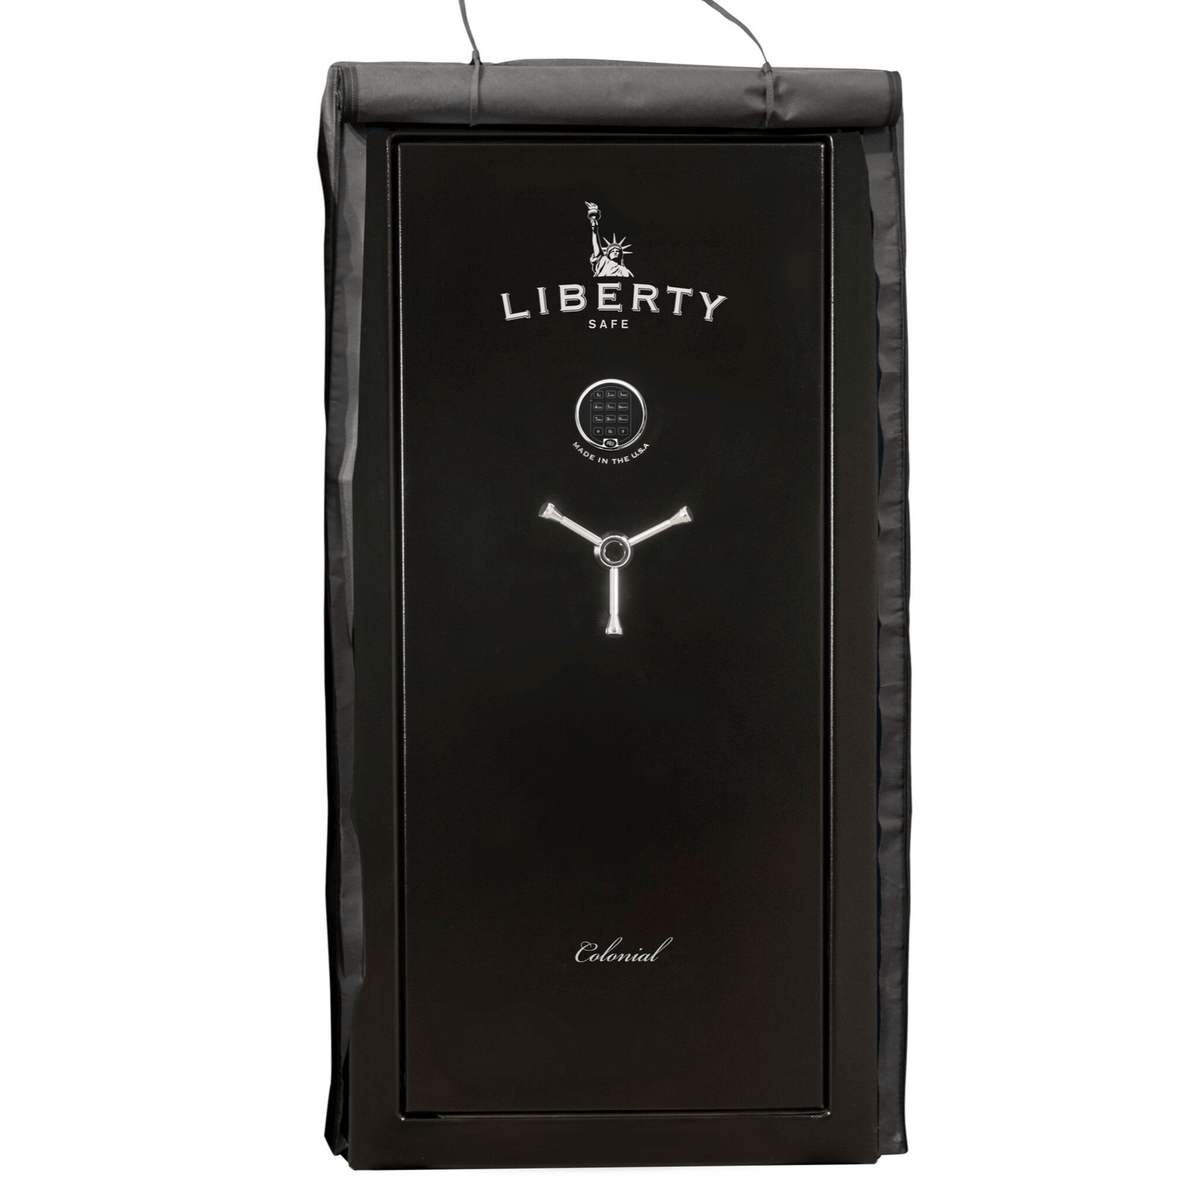 Accessory - Security - Safe Cover - 20-25 size safes